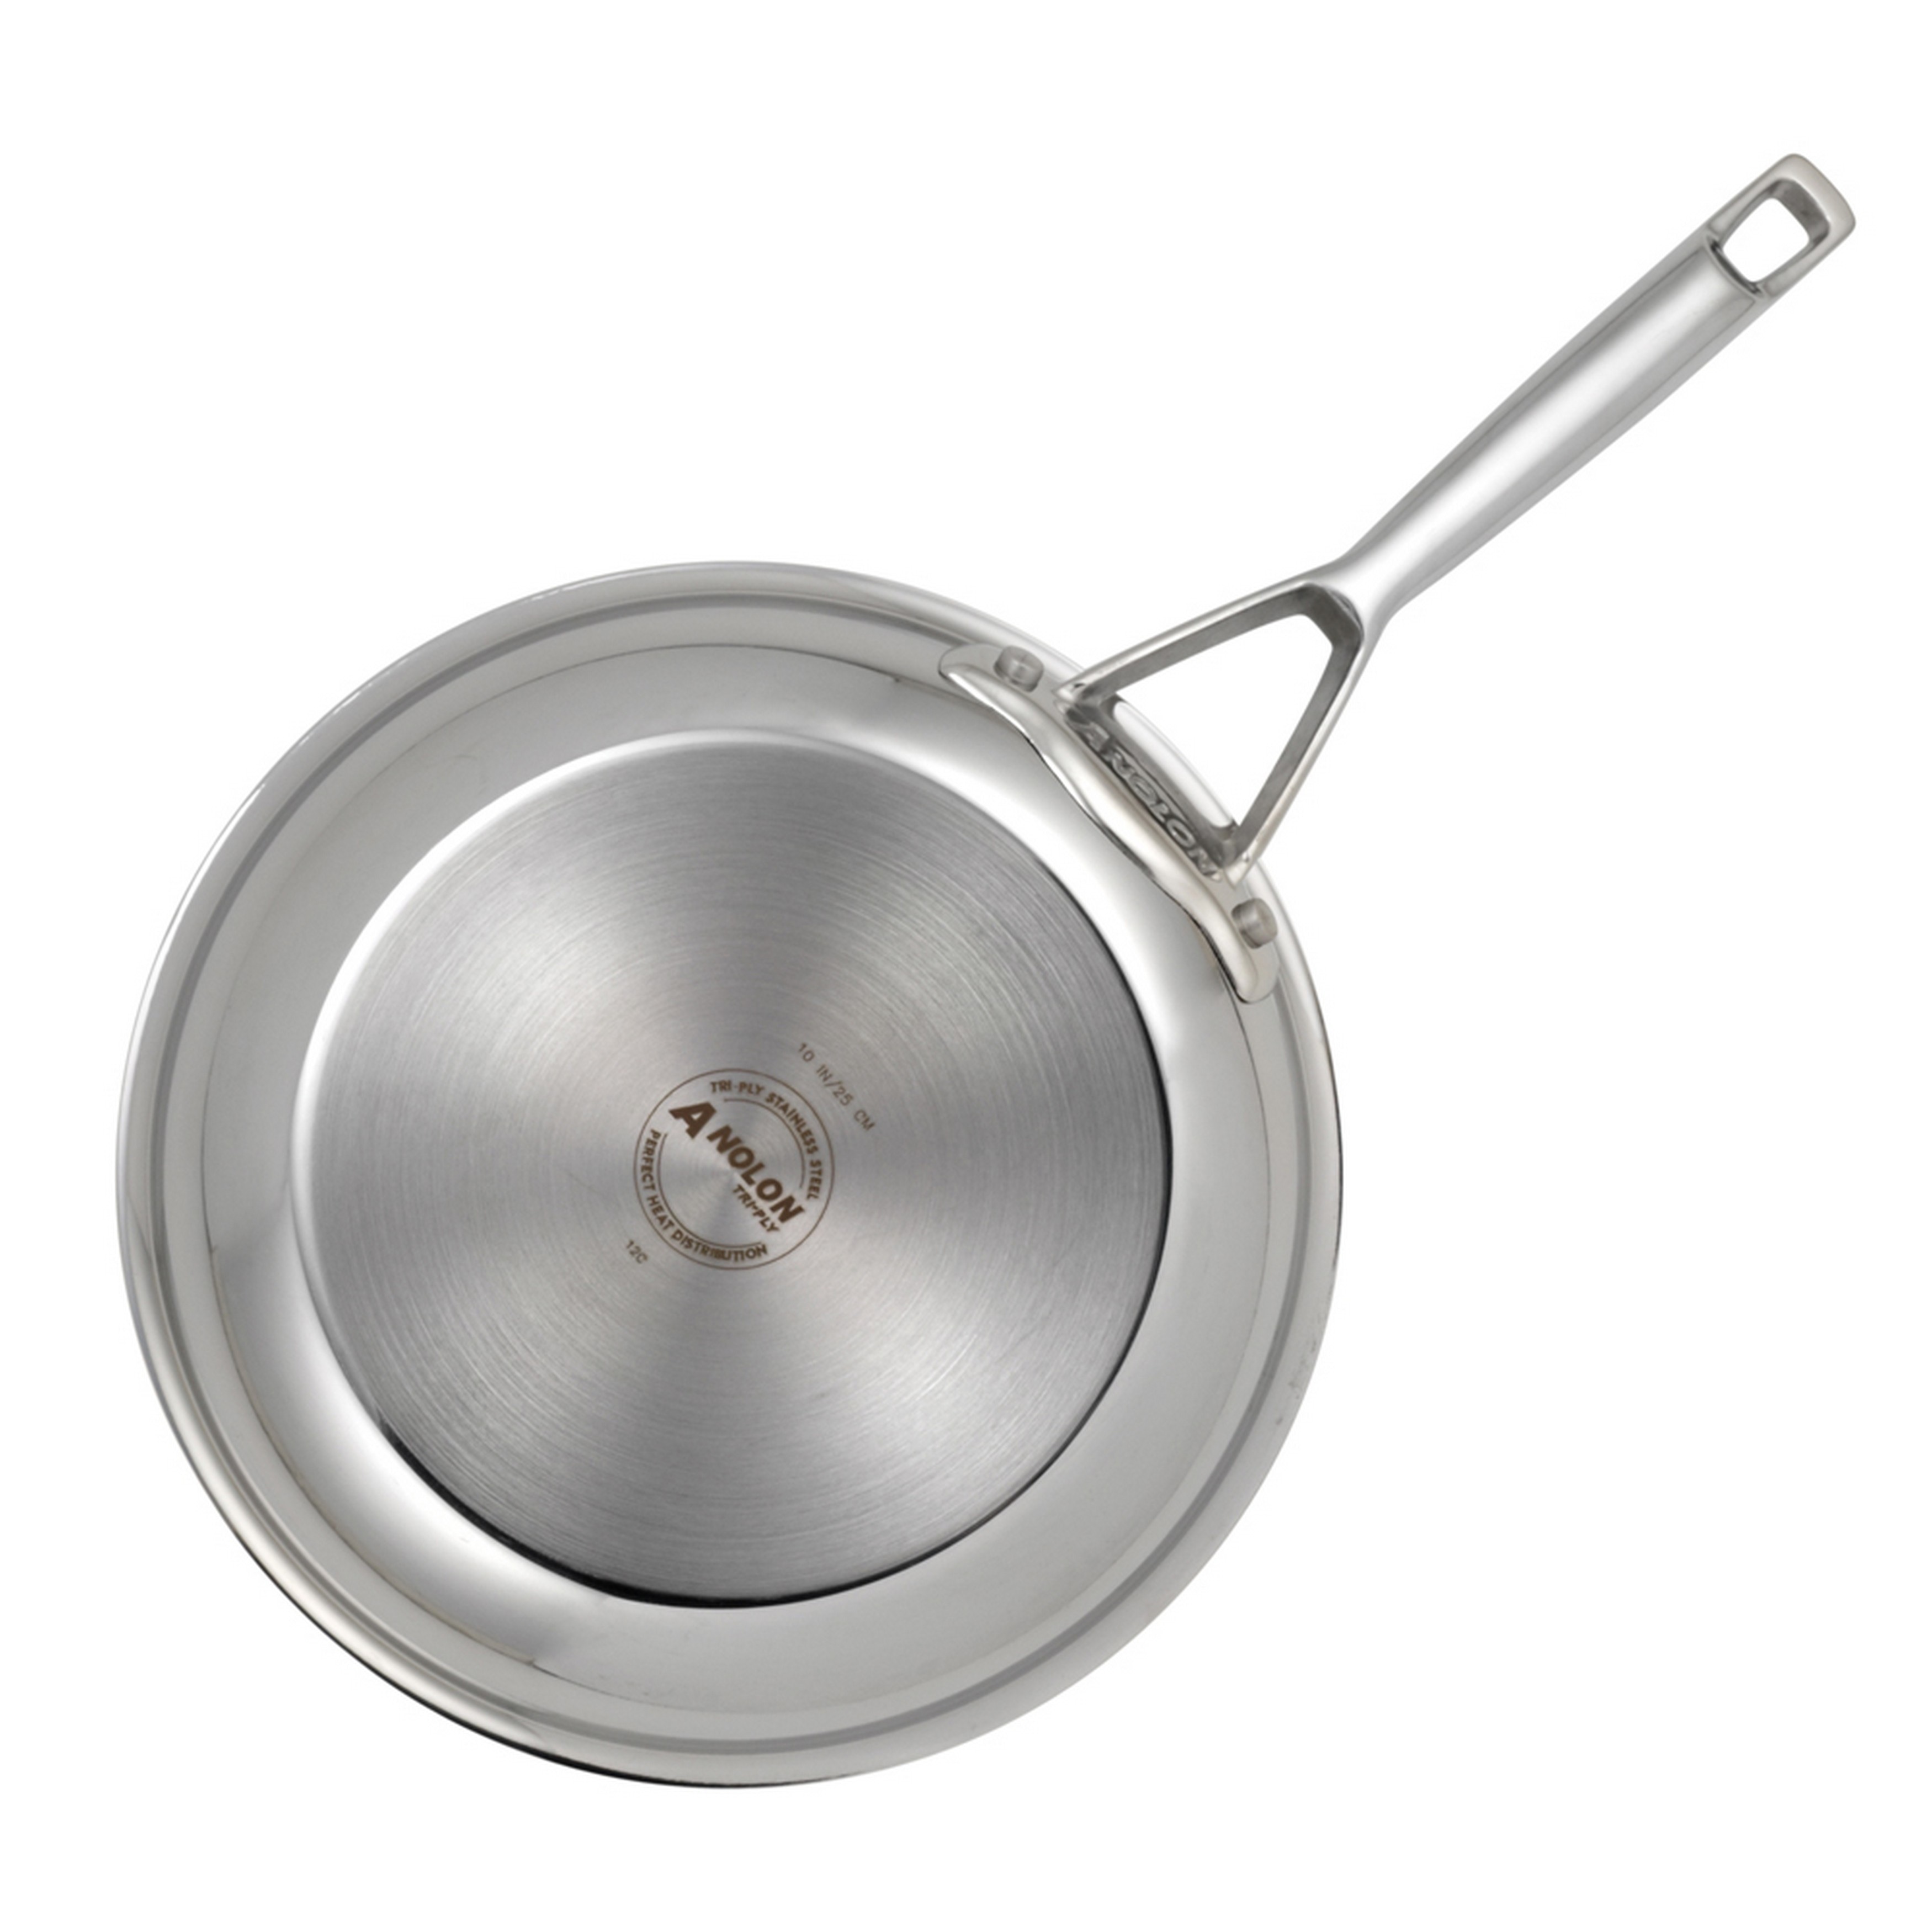 https://ak1.ostkcdn.com/images/products/9206705/Anolon-Tri-ply-Clad-Stainless-Steel-12-3-4-inch-Nonstick-French-Skillet-6b695b7c-60aa-4731-9902-6edb9580c422.jpg